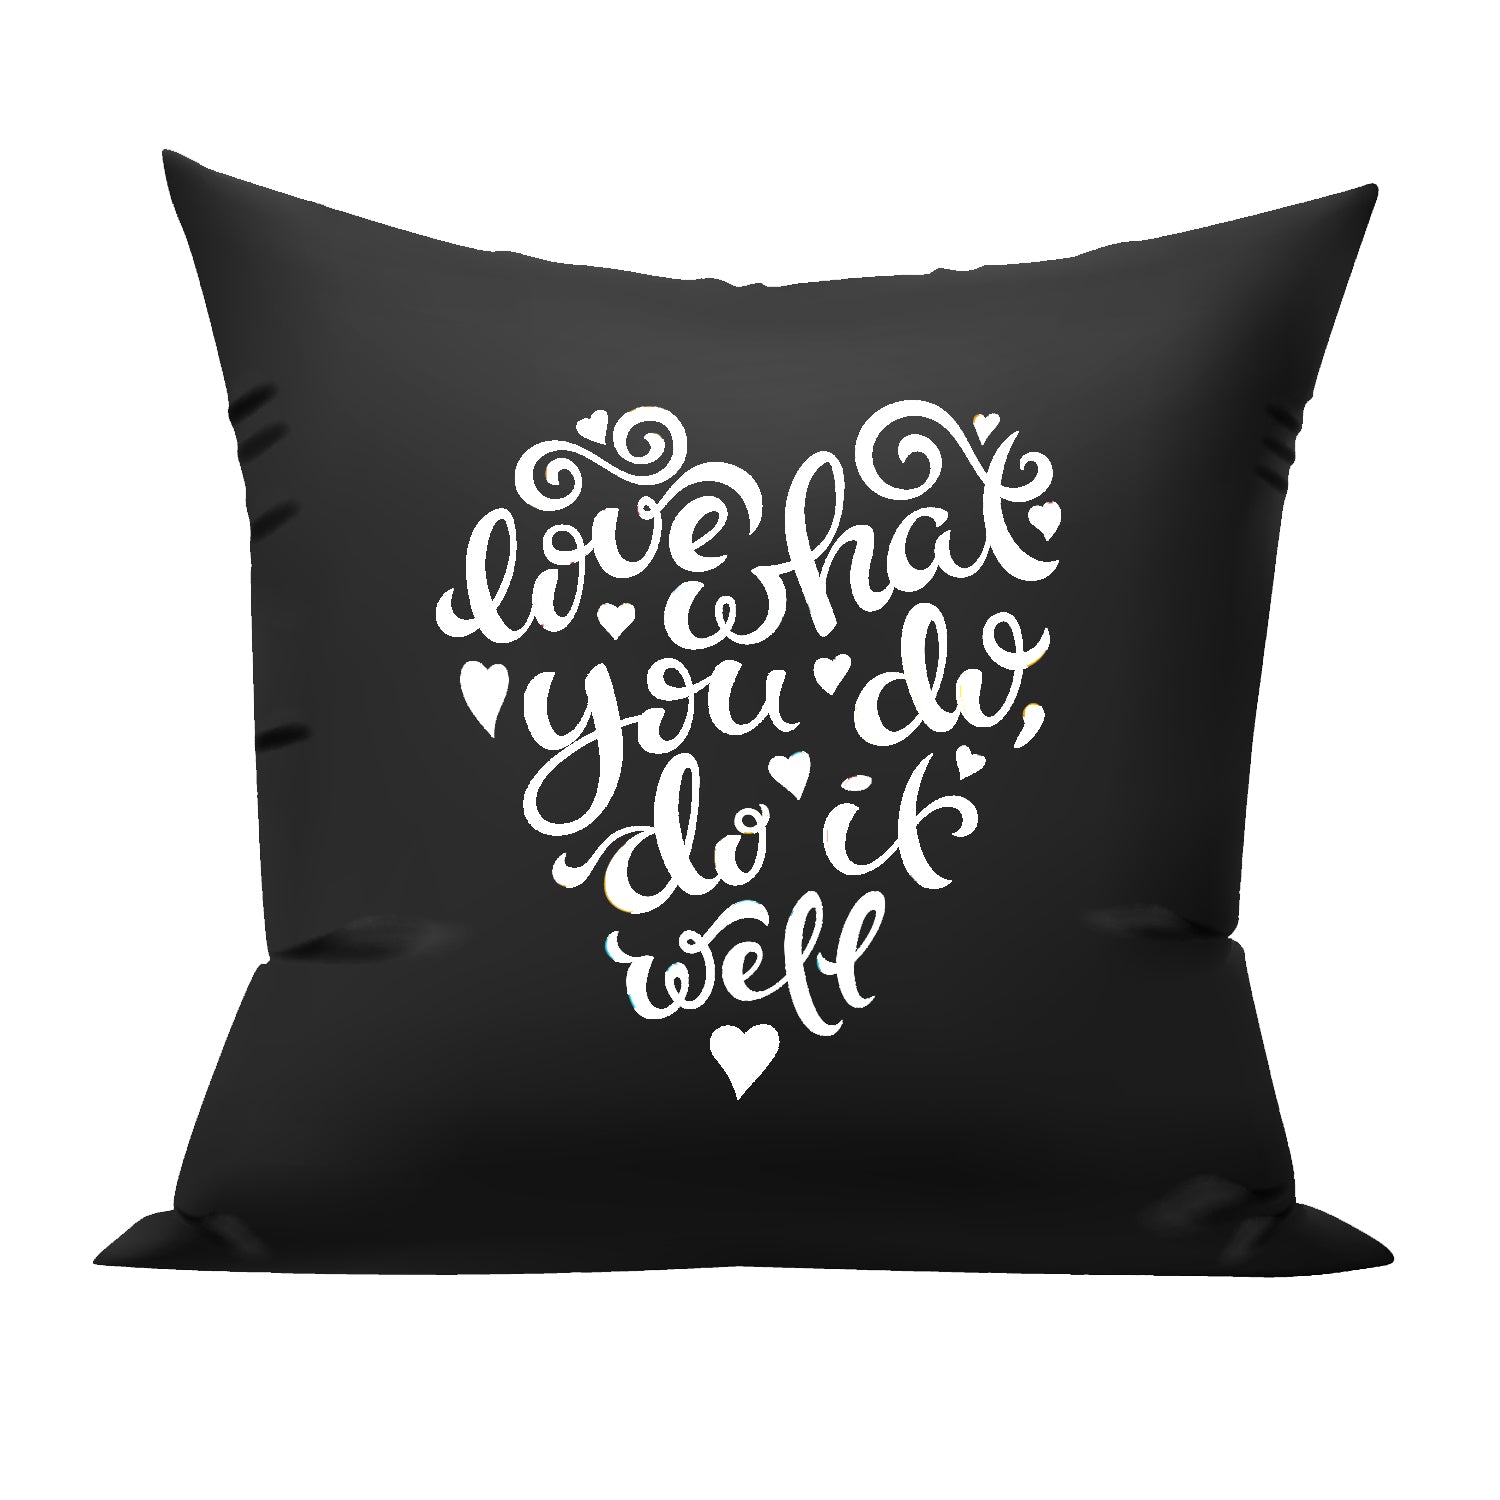 Love what you do Do it well cushion